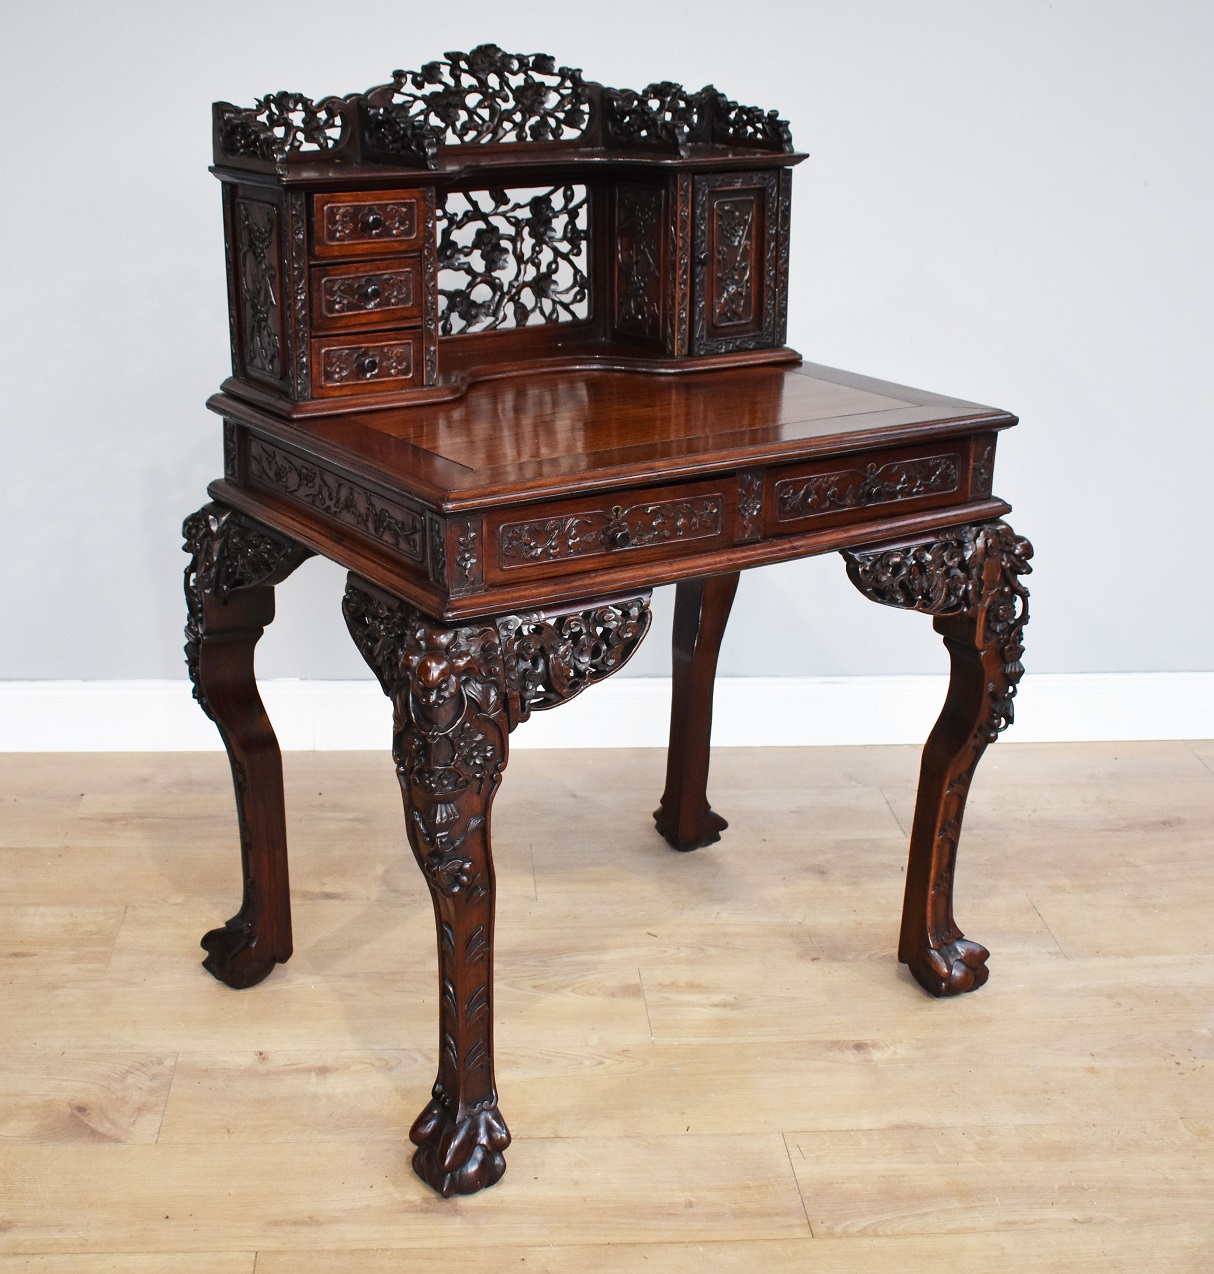 19th Century Chinese Padouk Wood Desk Fgb Antiques